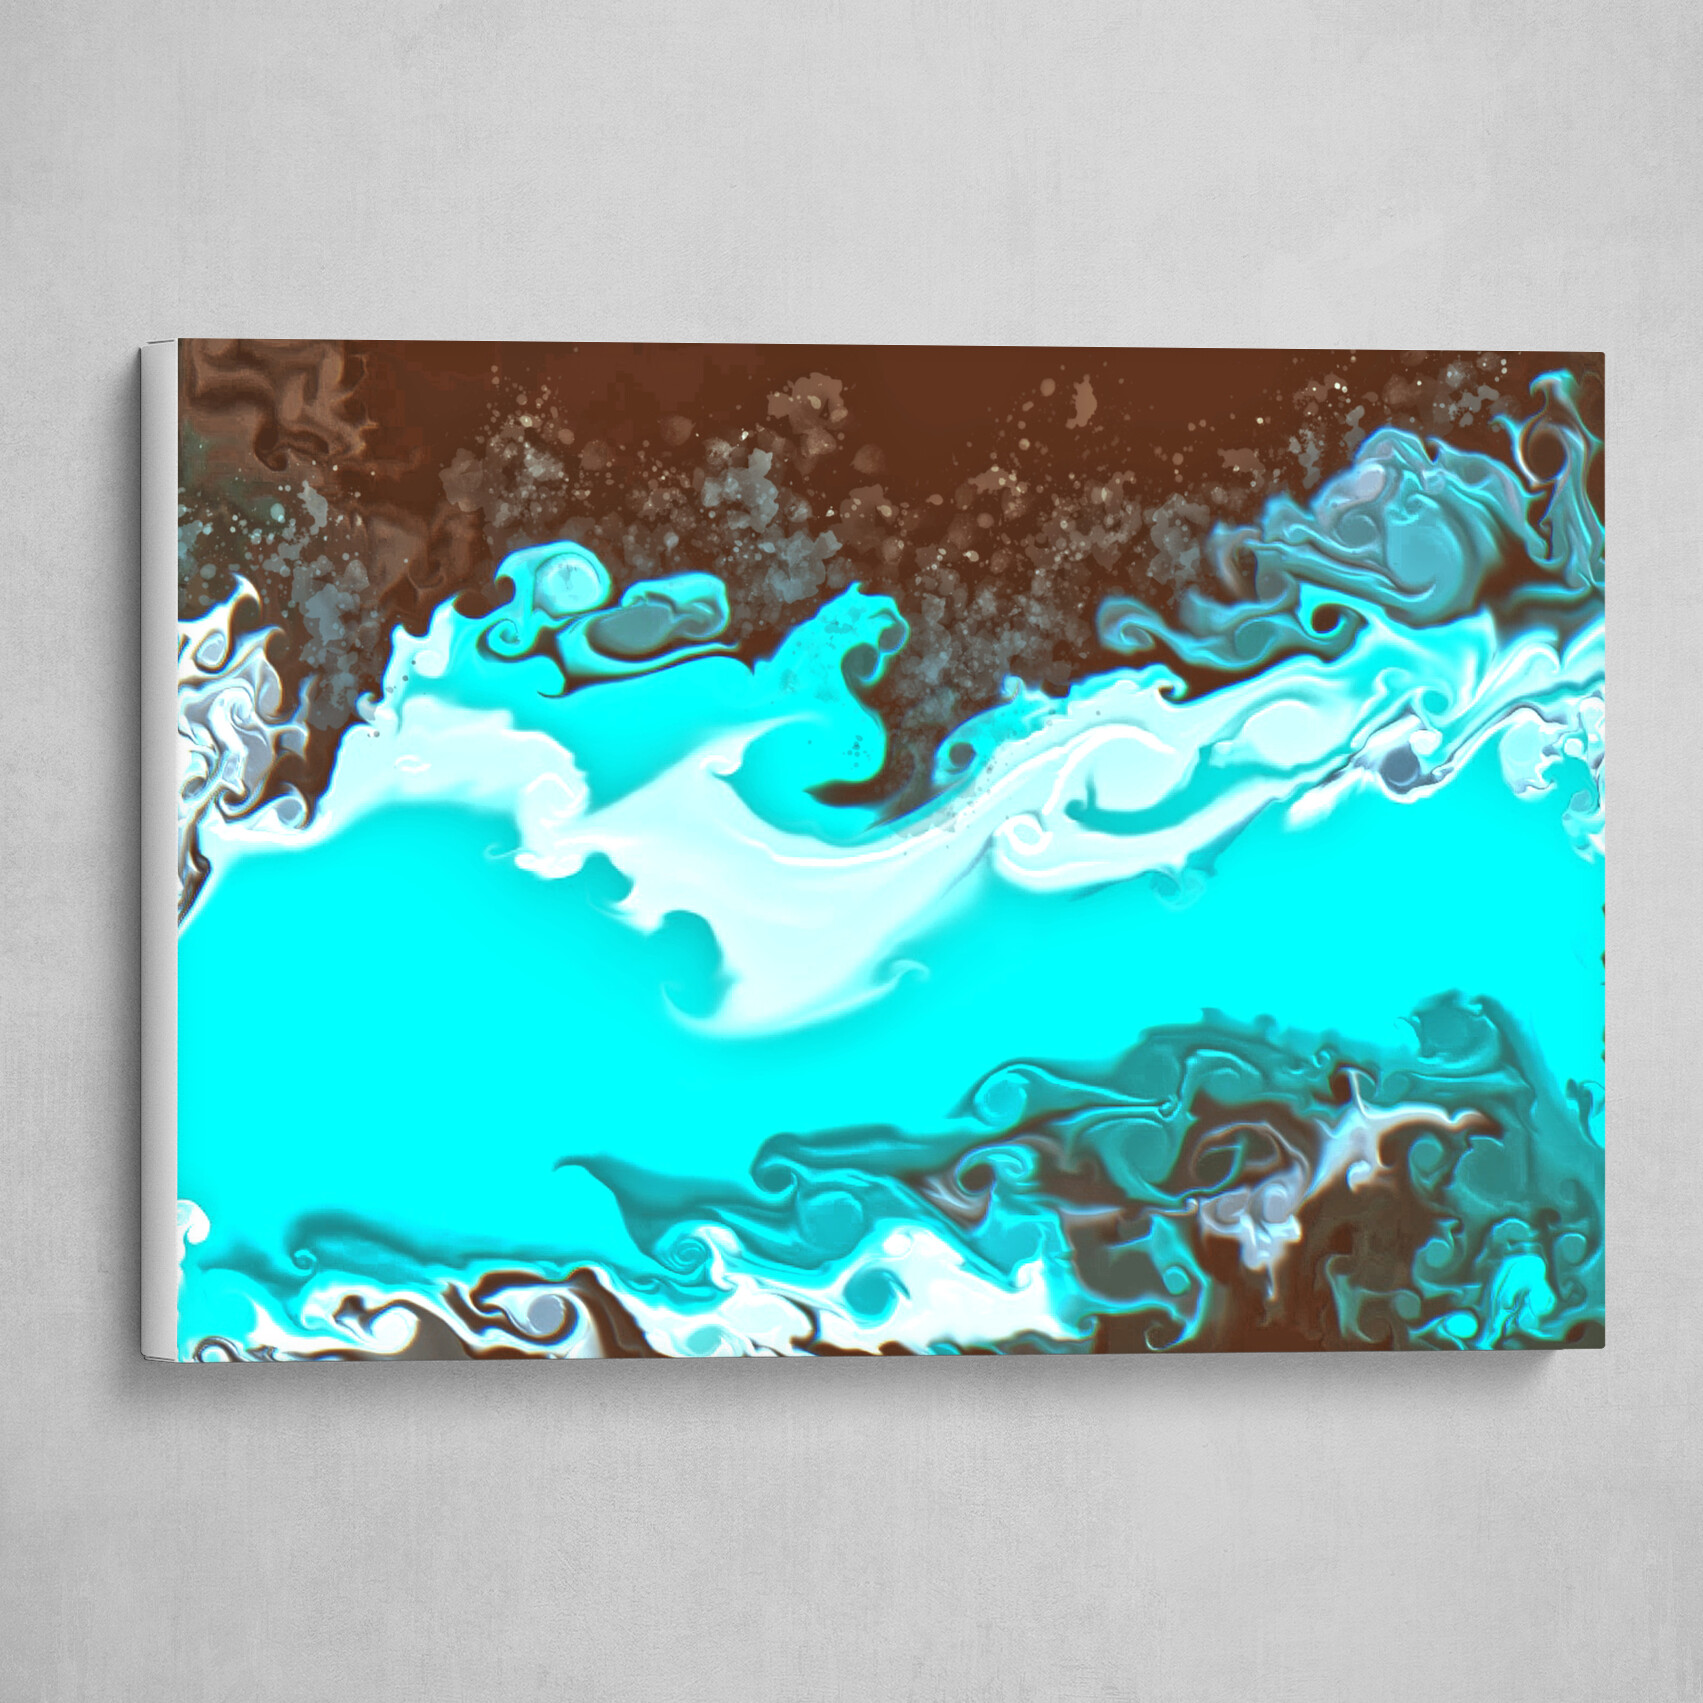 Blue White and Brown fluid pour abstract 4